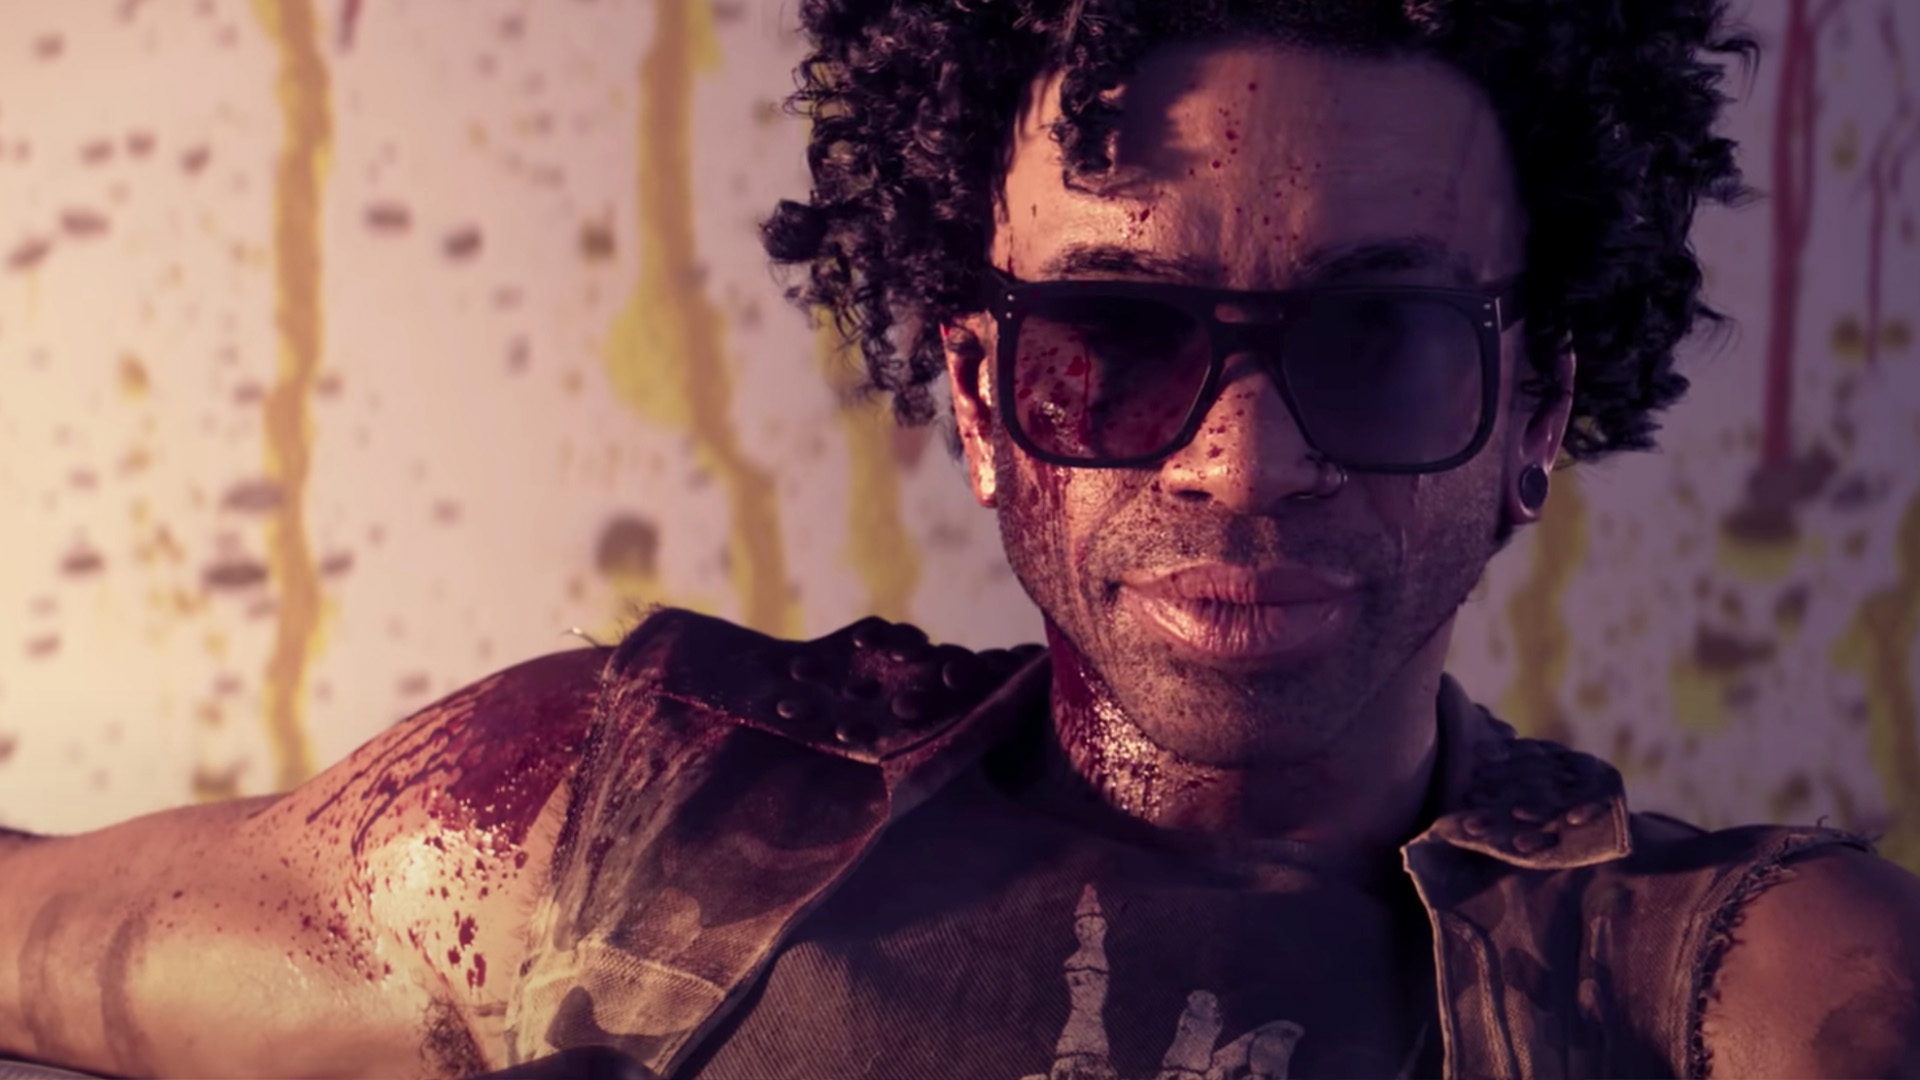 When Does Dead Island 2 Take Place?